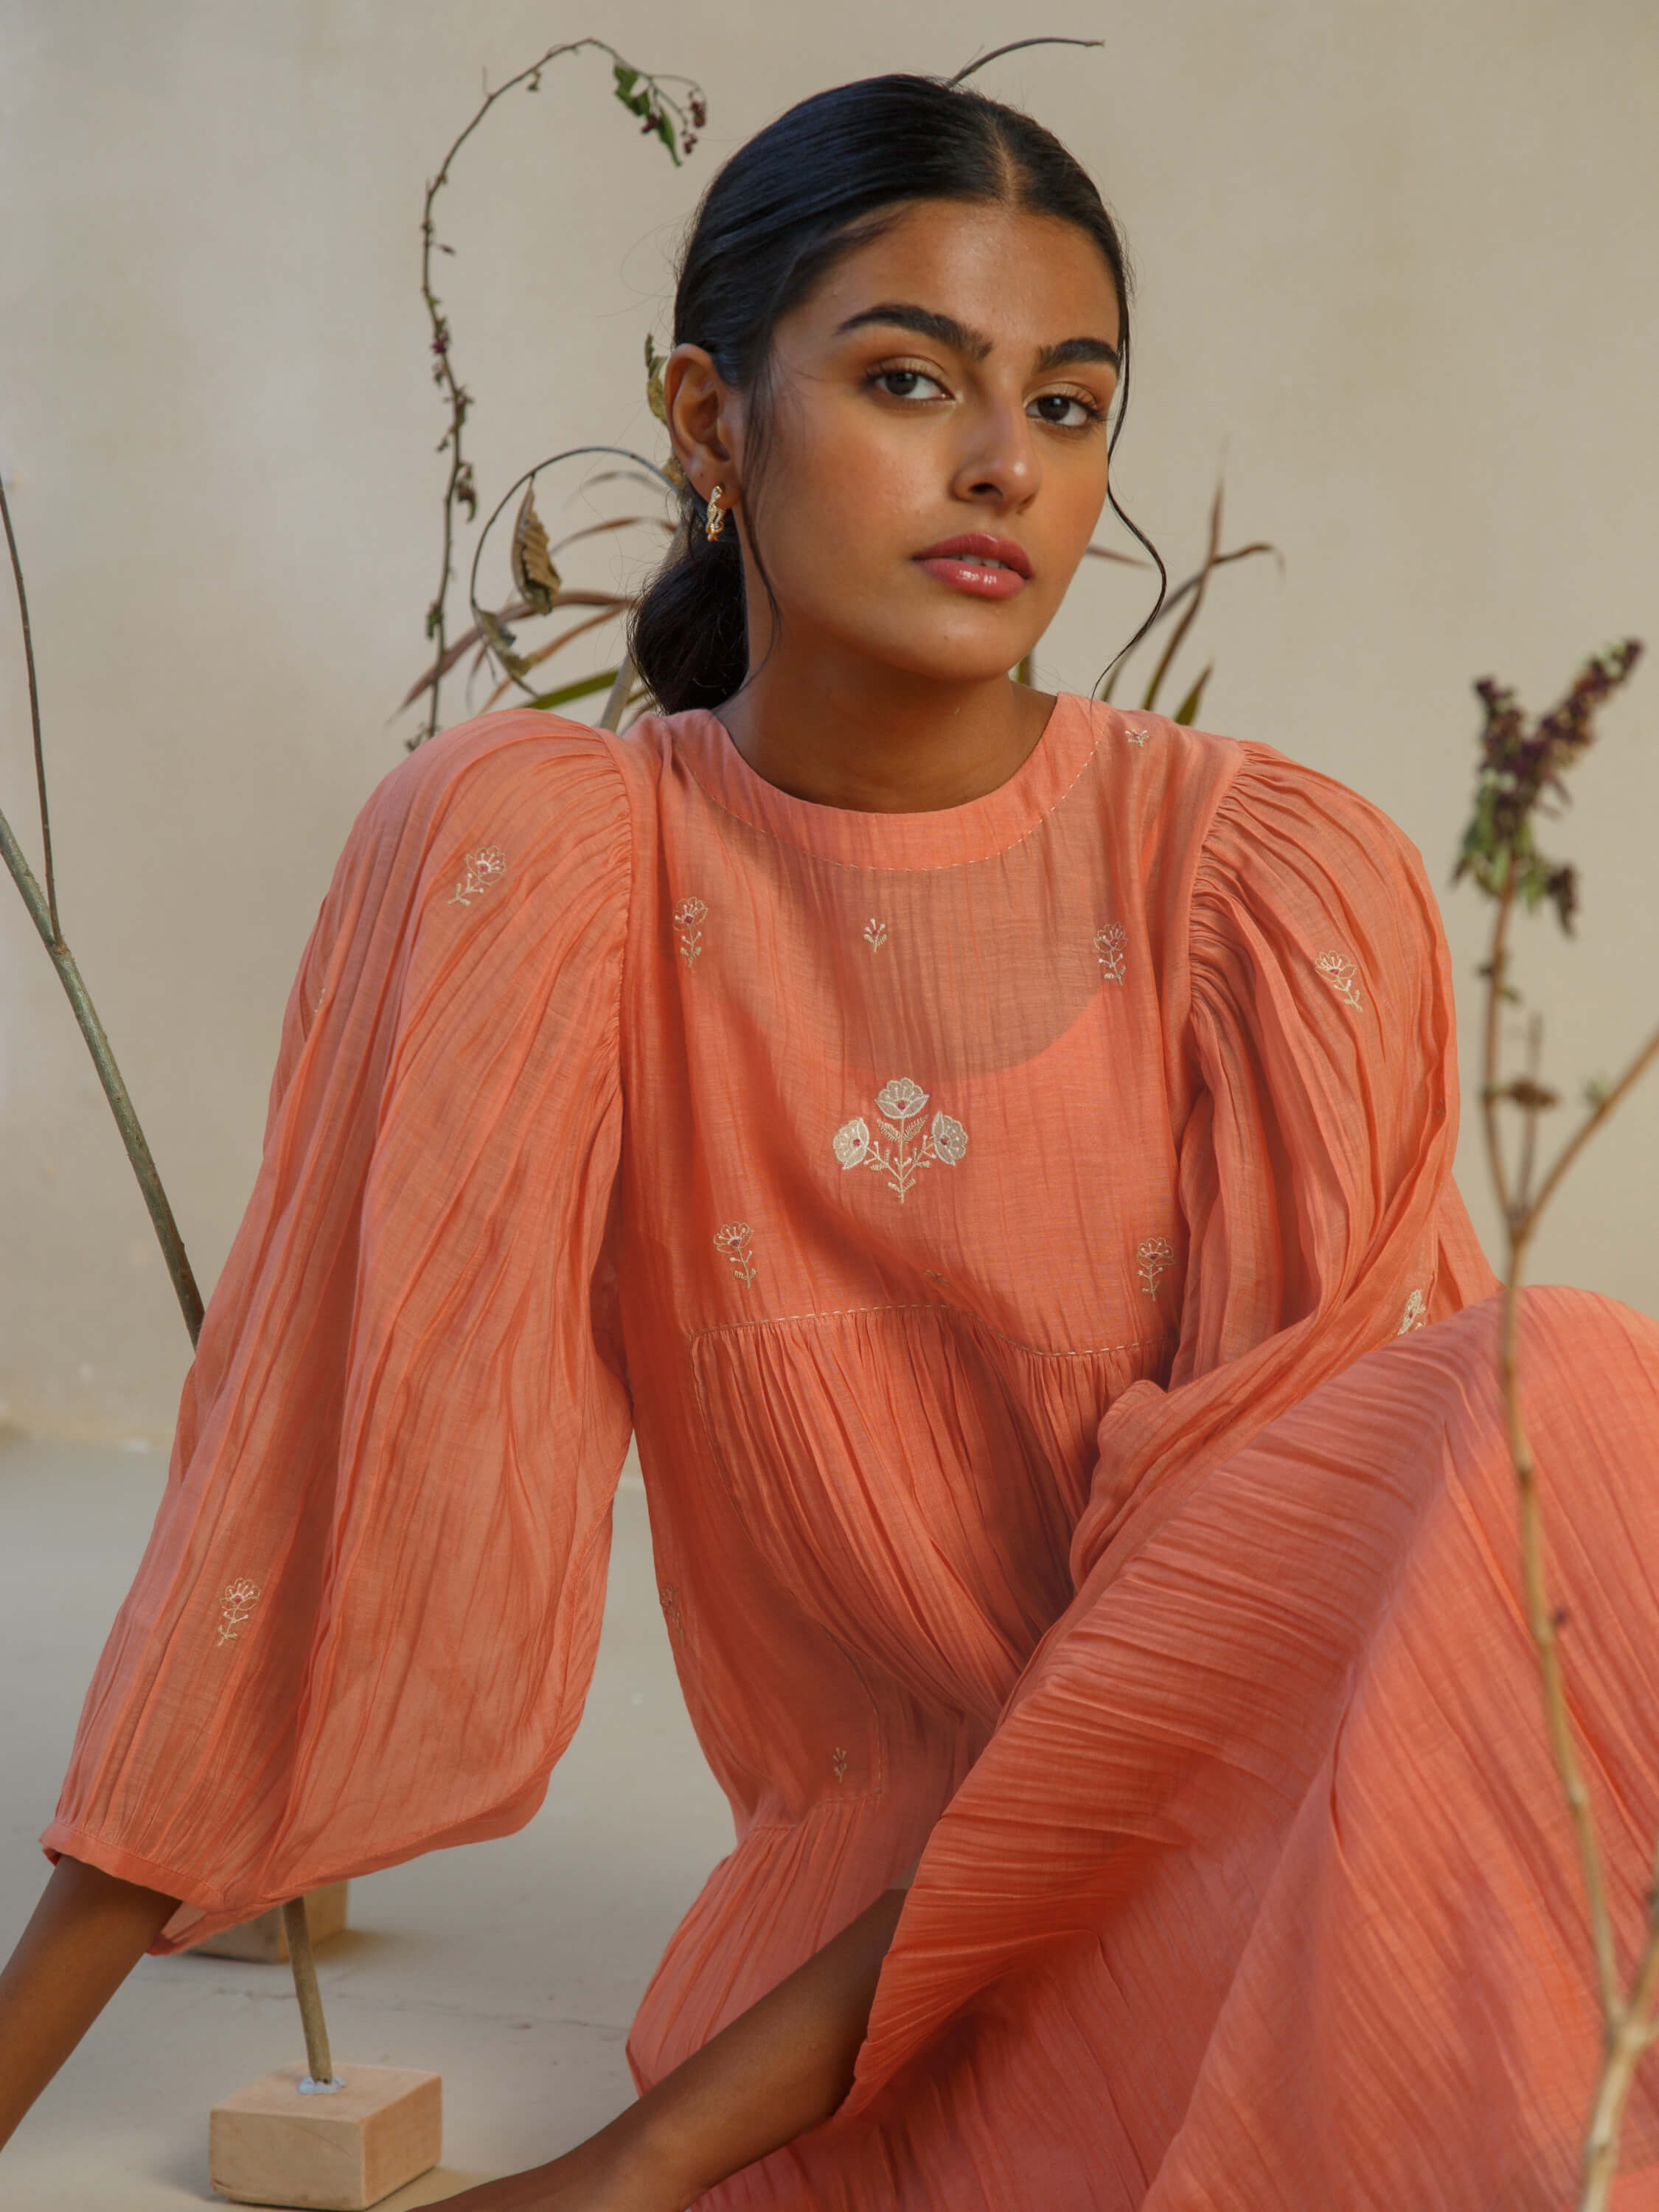 Woman in an orange long-sleeve dress with embroidered floral details.